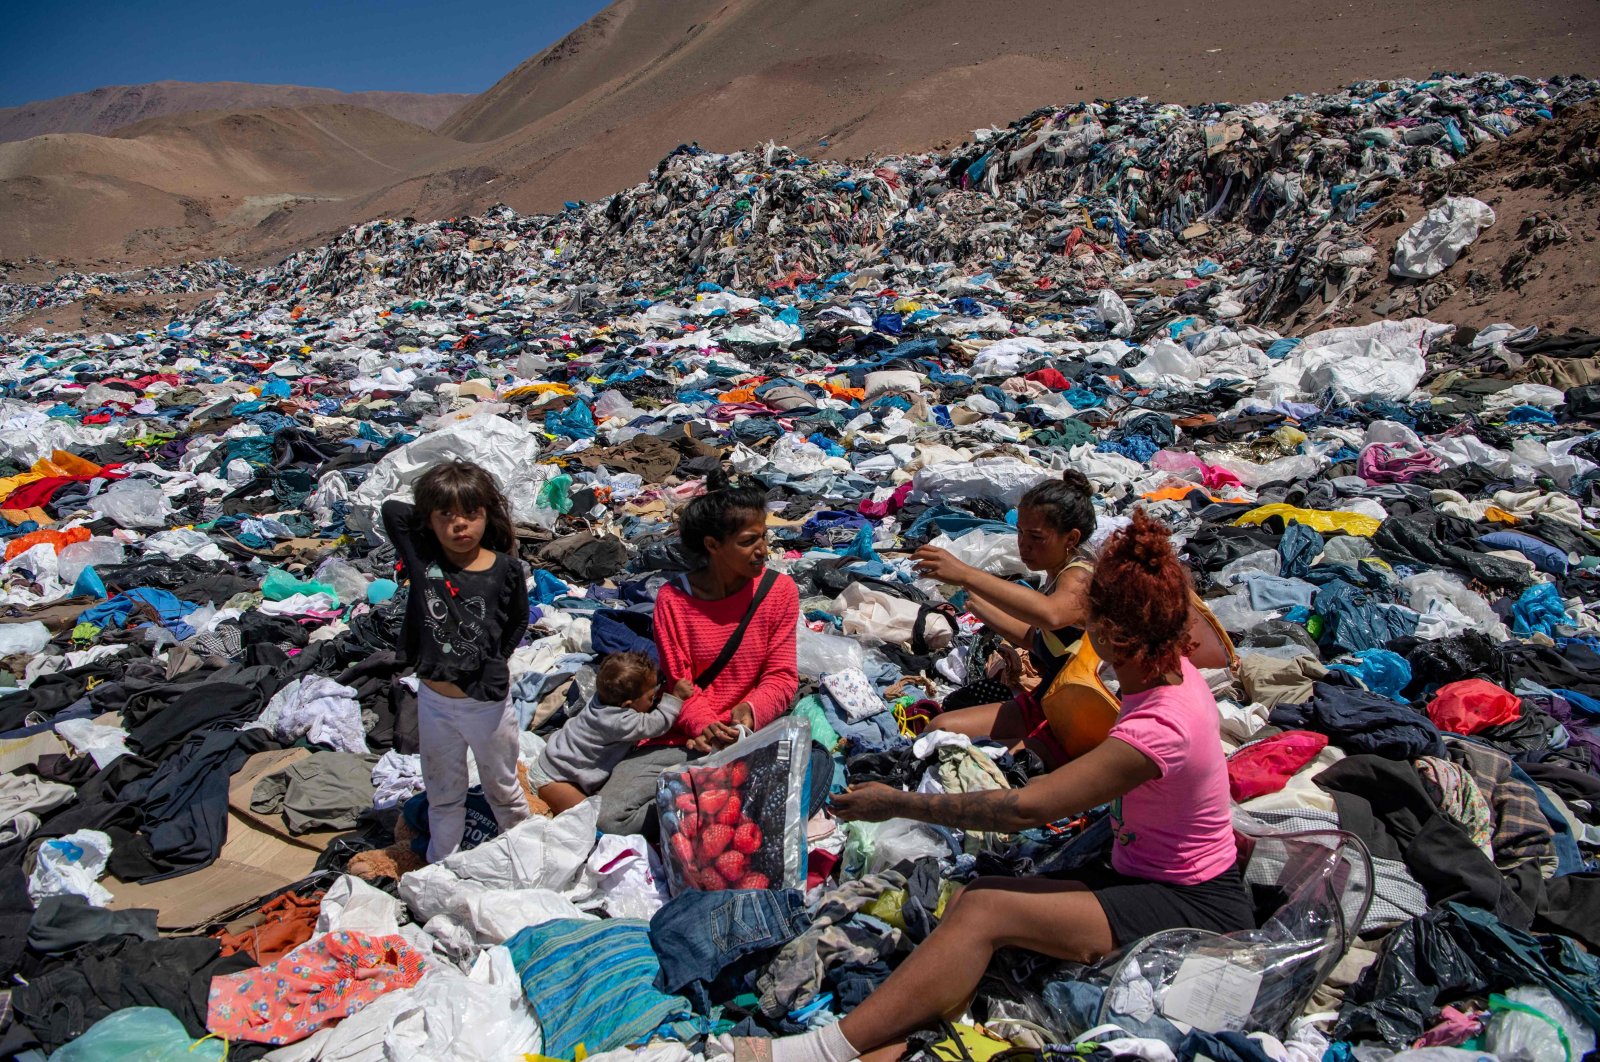 Women search for used clothes amid tons of discarded items in the Atacama desert, in Alto Hospicio, Iquique, Chile, Sept. 26, 2021. (AFP Photo)